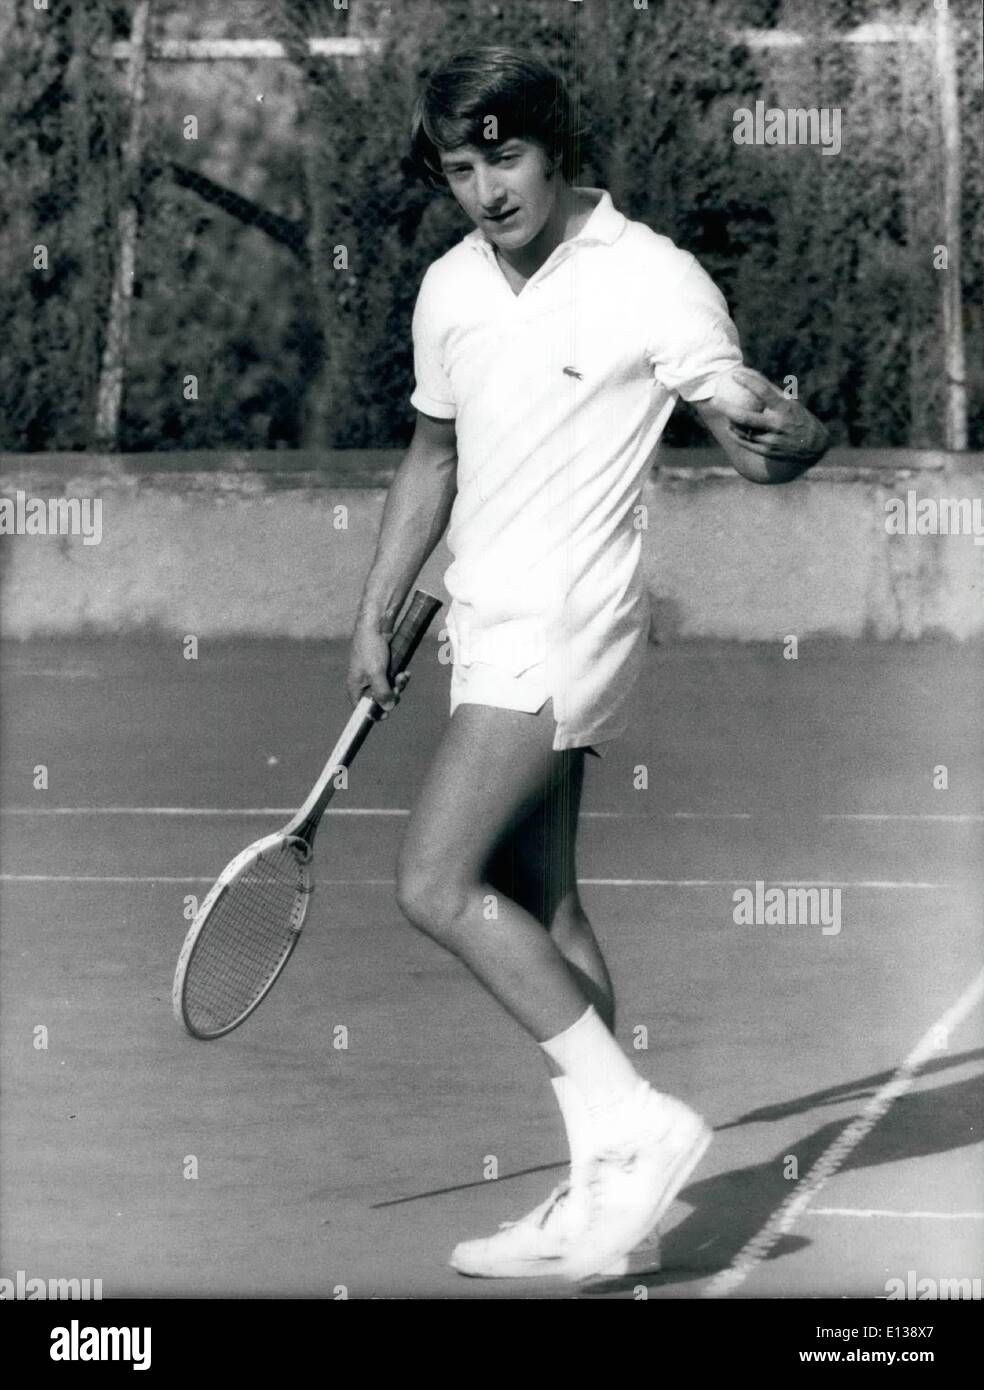 Feb. 29, 2012 - Septembre 1971. Dustin Hofman plays tennis.......... Dustin Hofman the famous actor spends these days in Rome waiting to play a film up to date directed by director Pietro Germi ''Finche Divo Non Ci Divida'' besides with star Carla Gravina e Stafania Sandrelli. Now is loving tennis a little for the passion and also to record the night last during the holidays early. Every morning takes lessons and casyto find him in a well backland and volee. Stock Photo